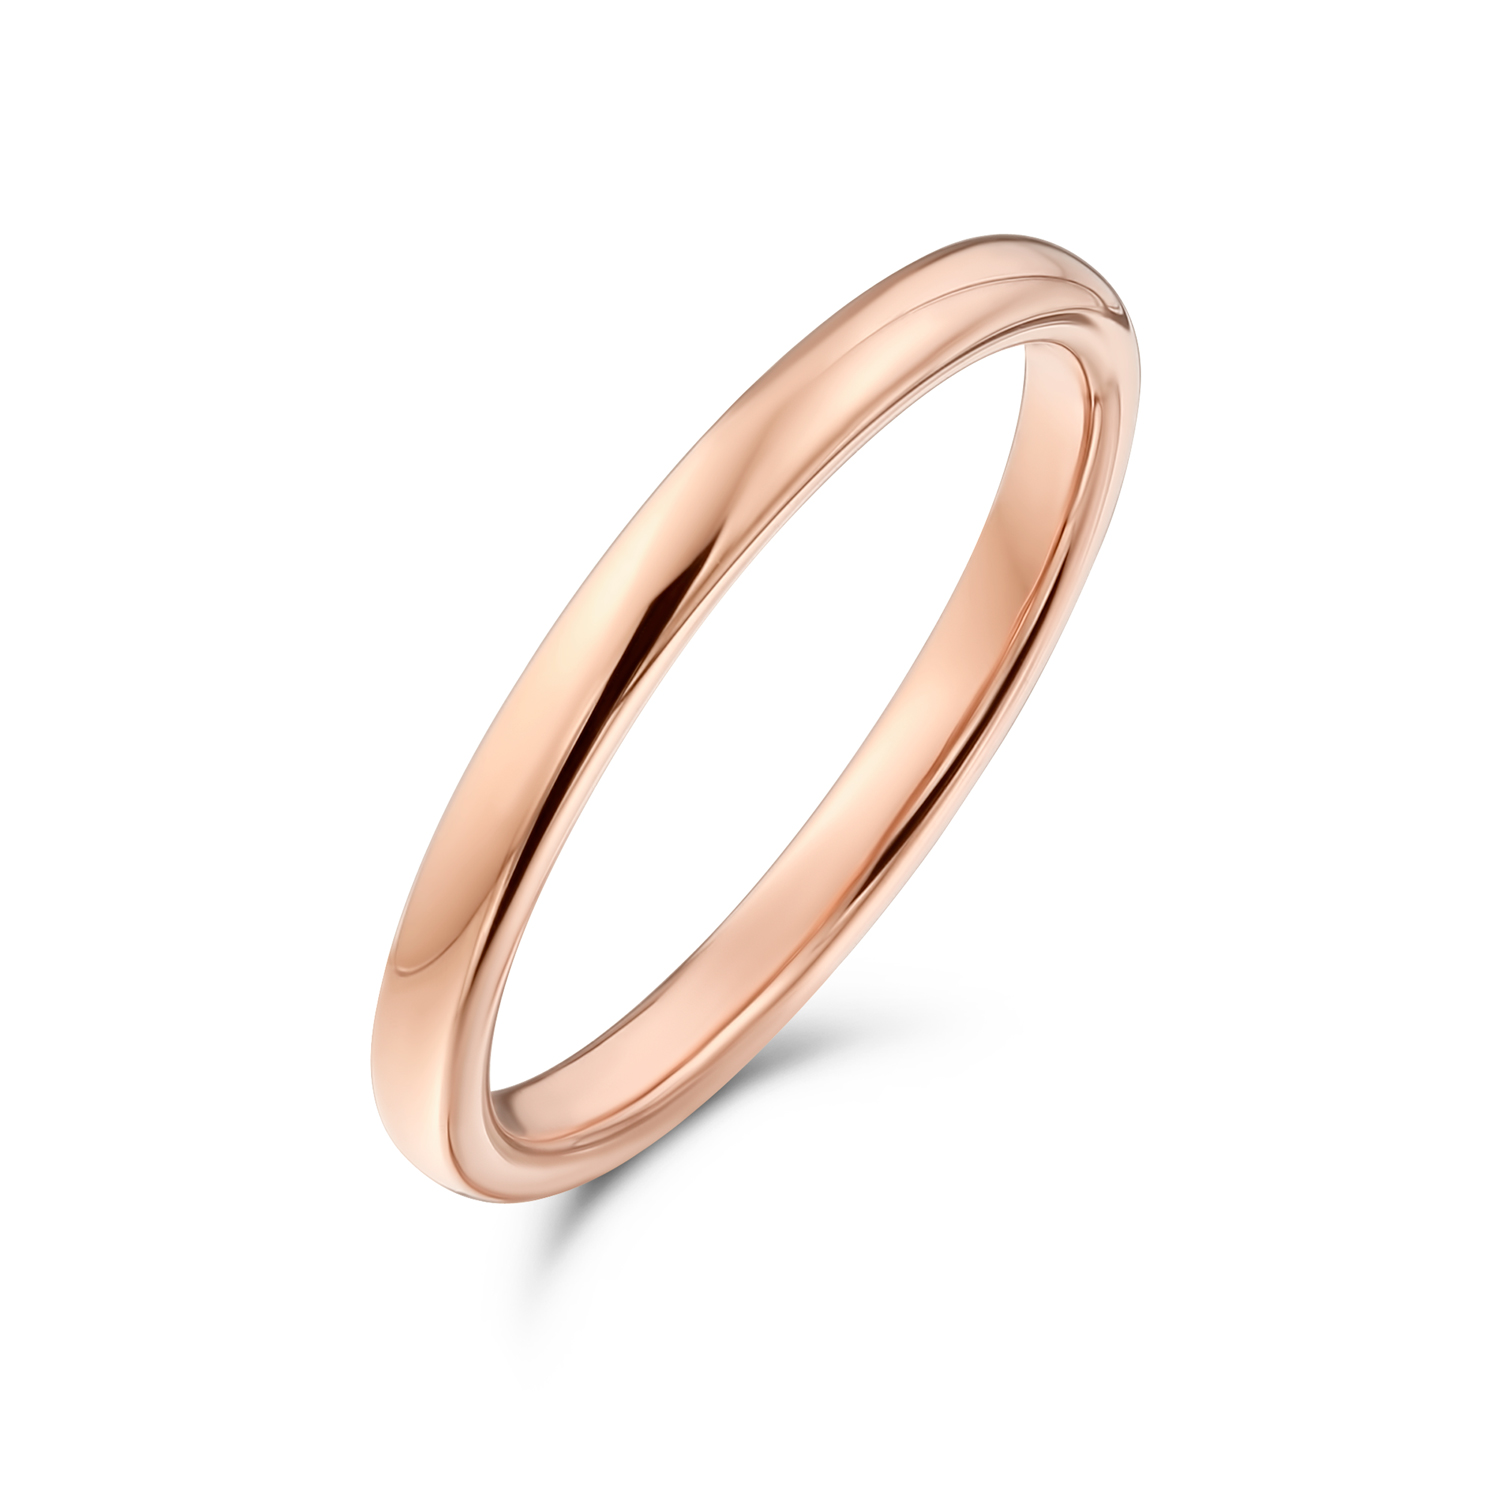 stackable rings layering rings for women tiny cross ring dainty Thin ball stacking ring rose gold surgical steel simple thin ring